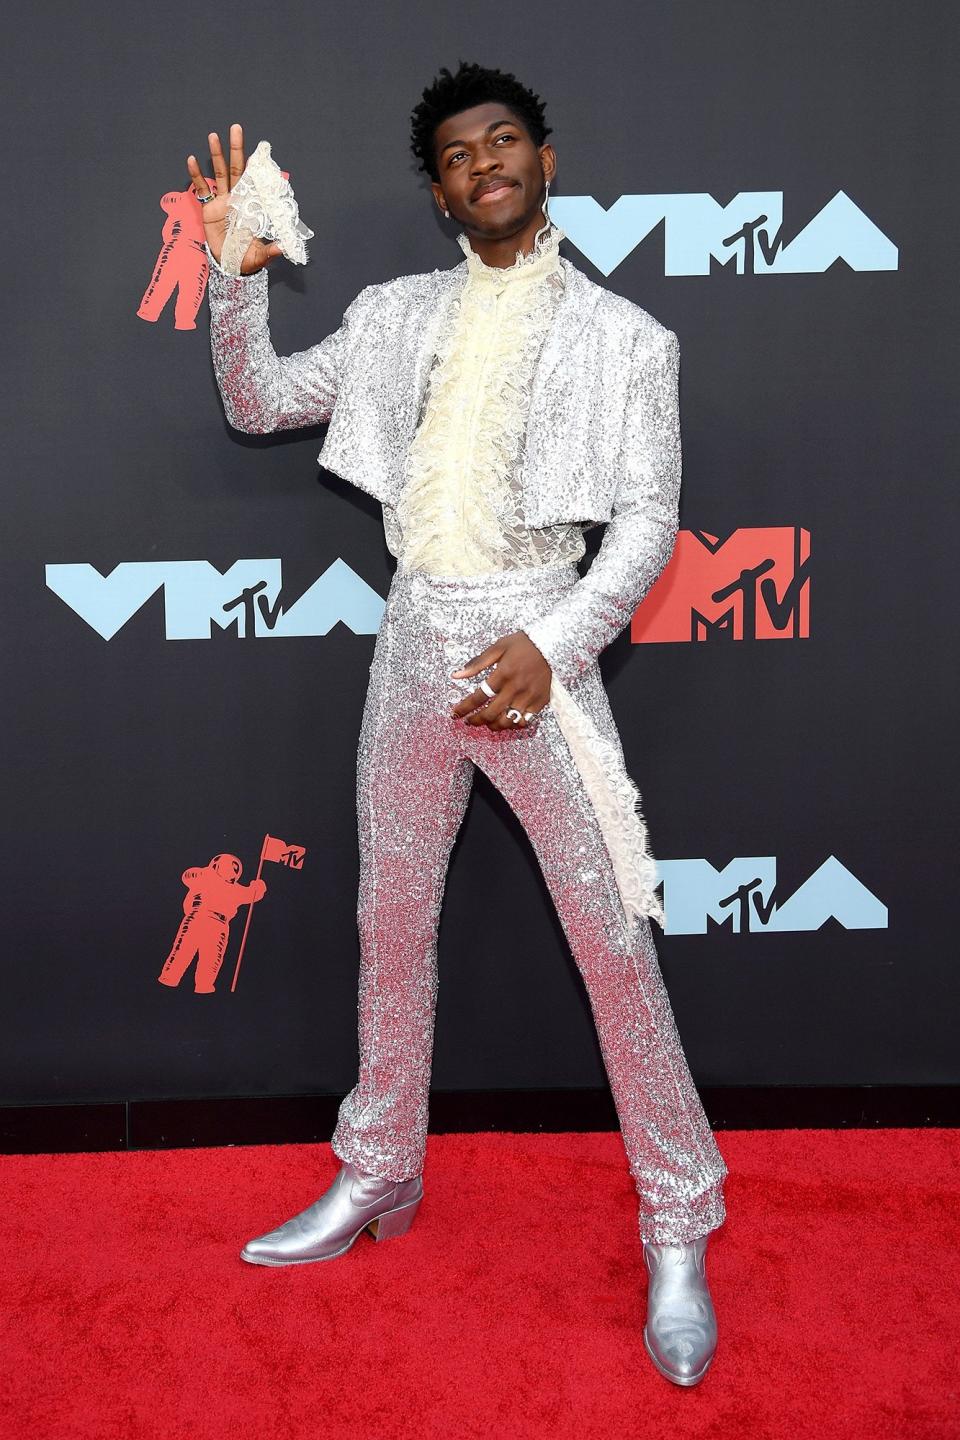 The Must See Looks from the 2019 VMAs